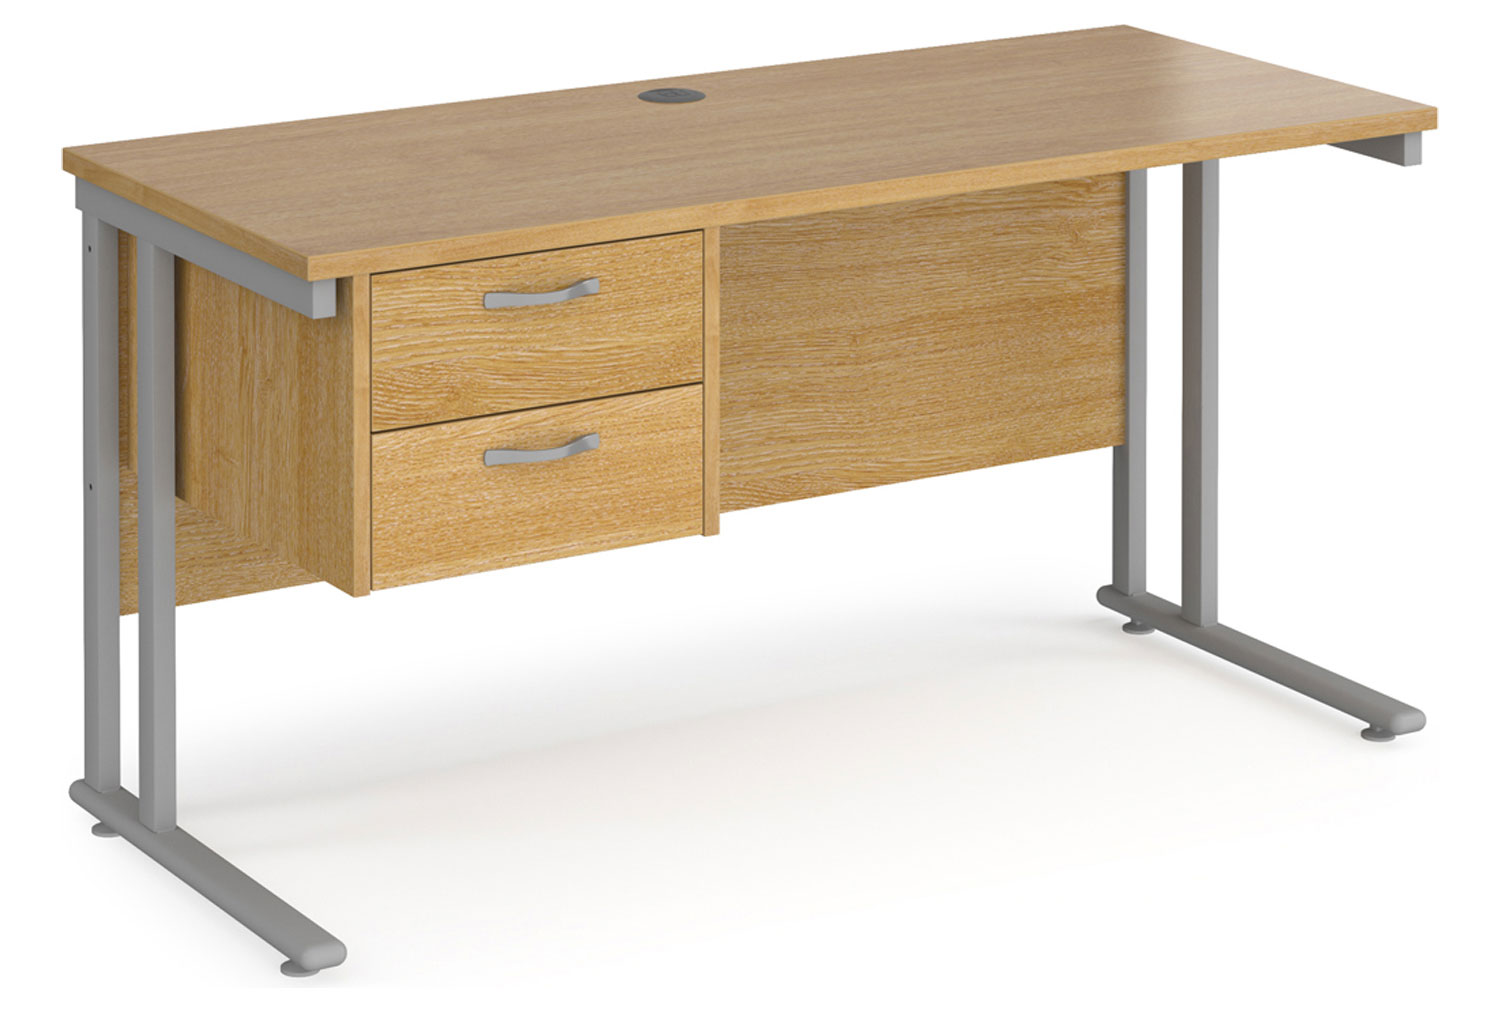 Value Line Deluxe C-Leg Narrow Rectangular Office Desk 2 Drawers (Silver Legs), 140wx60dx73h (cm), Oak, Express Delivery